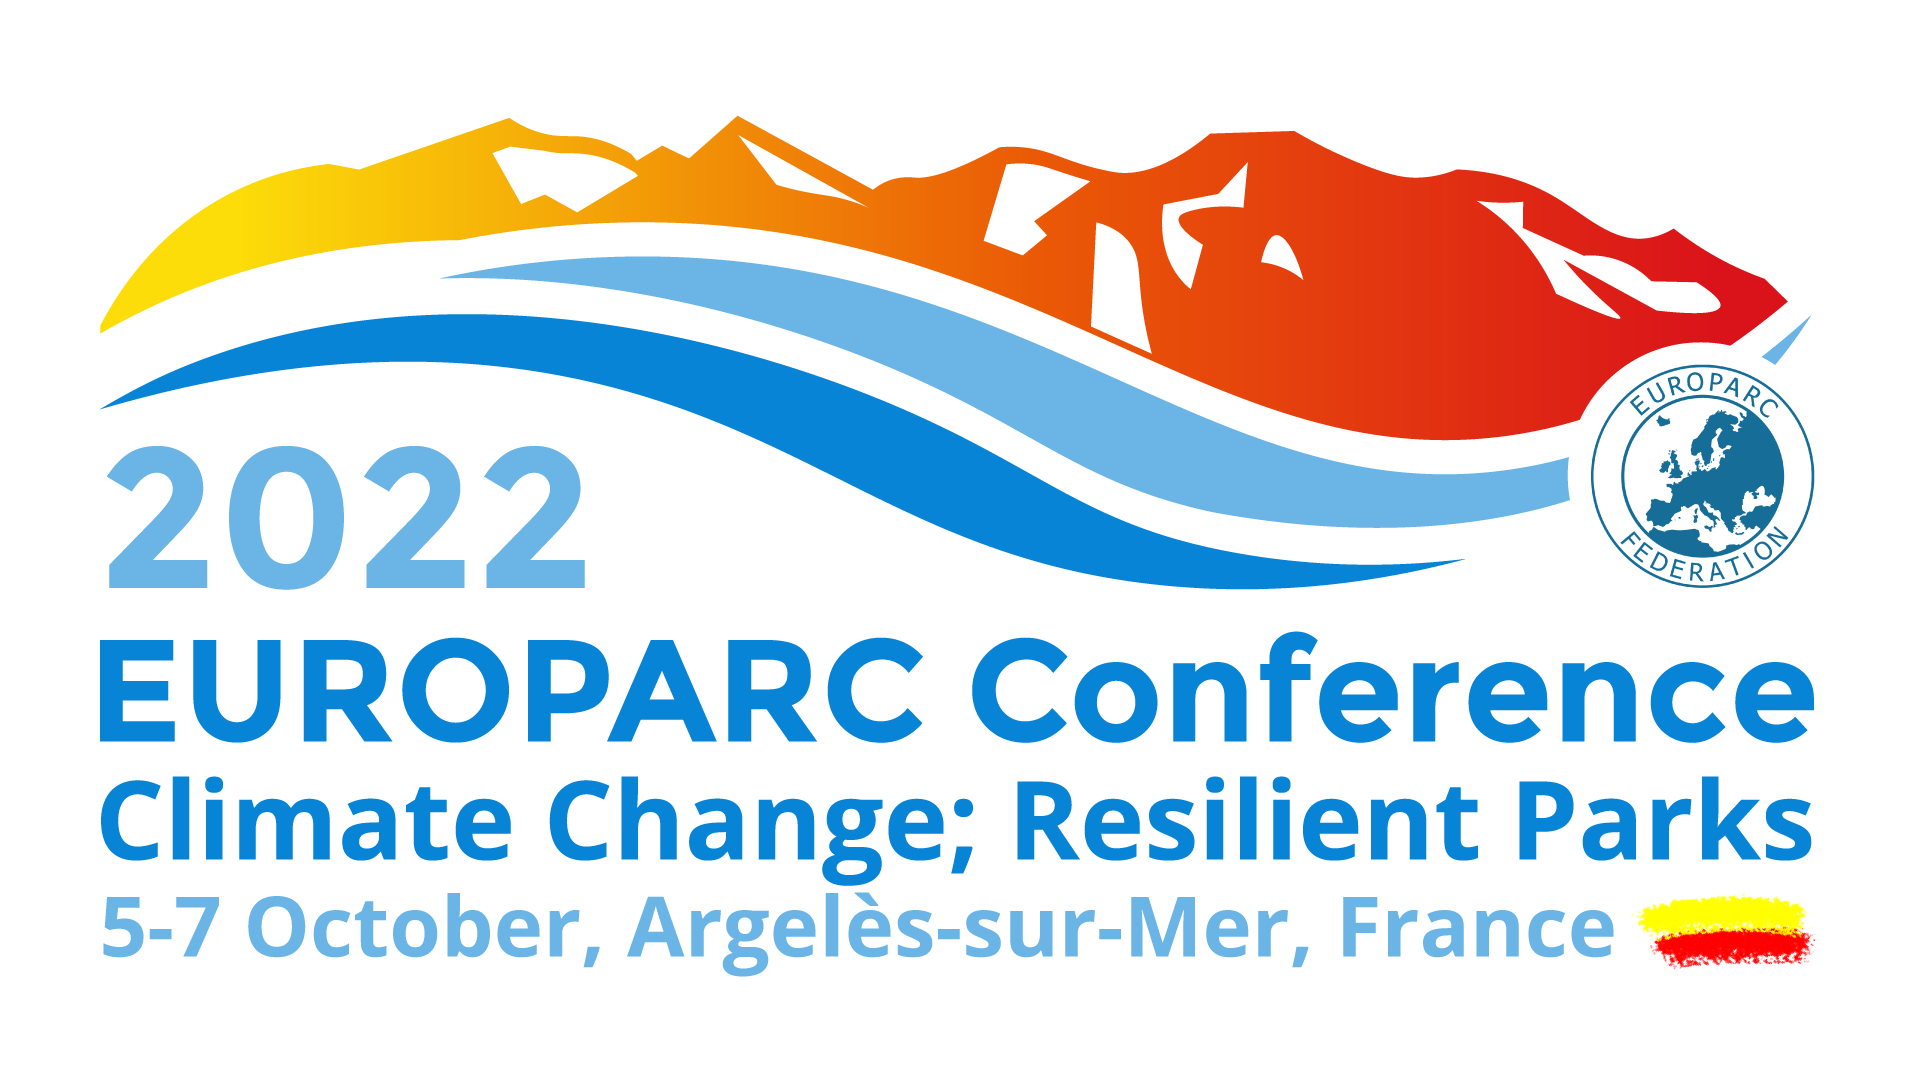 EUROPARC Conference - Climate Change: Resilient Parks